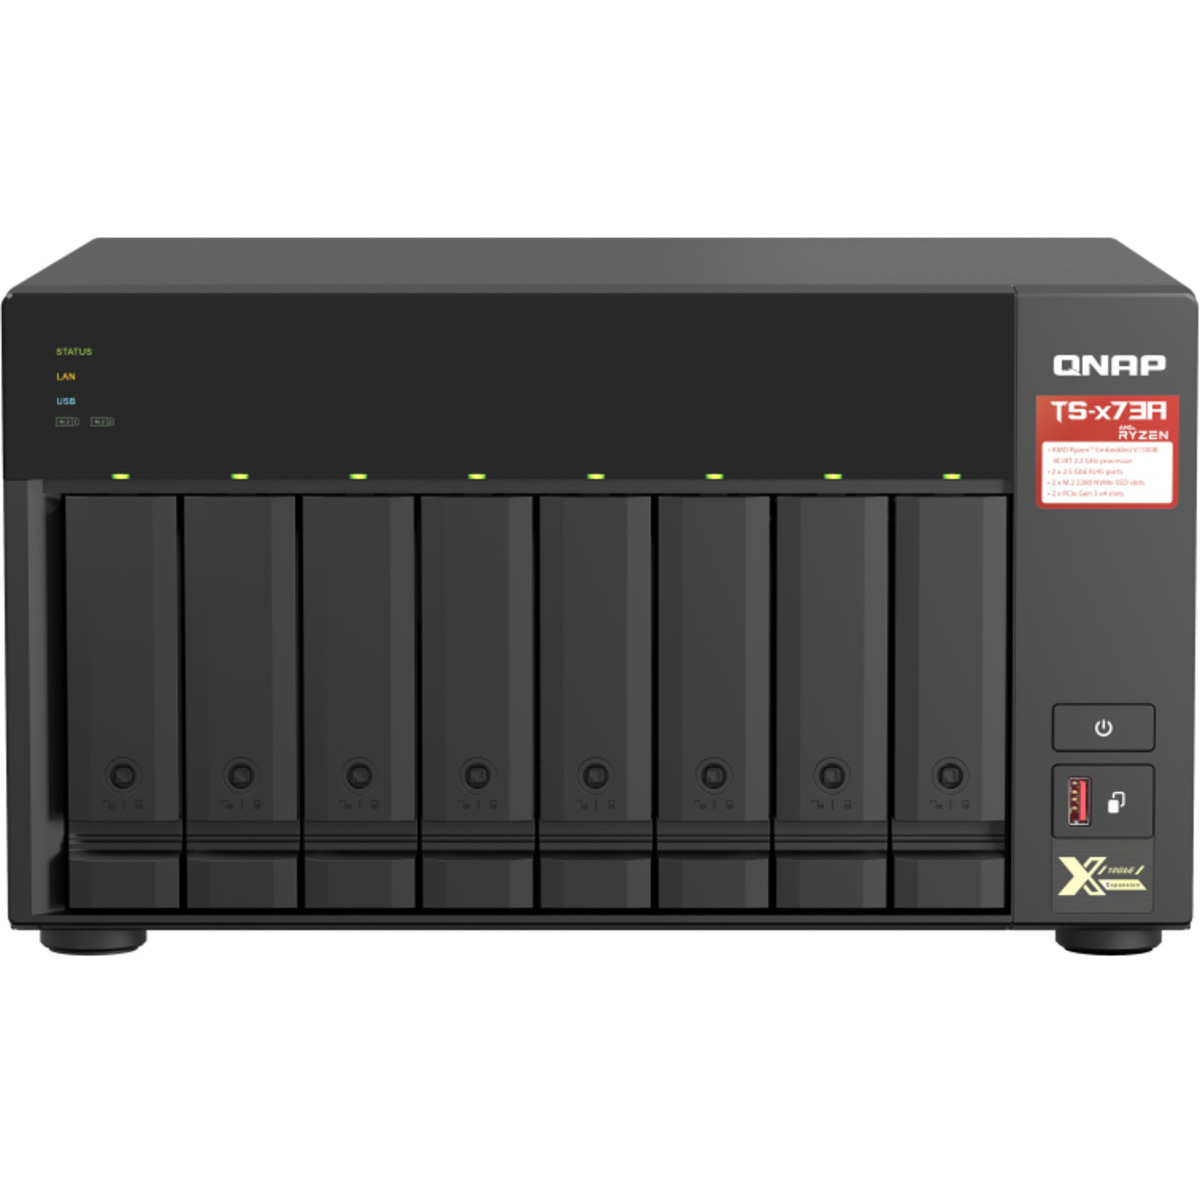 buy QNAP TS-873A Desktop NAS - Network Attached Storage Device Burn-In Tested Configurations - nas headquarters buy network attached storage server device das new raid-5 free shipping usa christmas new year holiday sale TS-873A